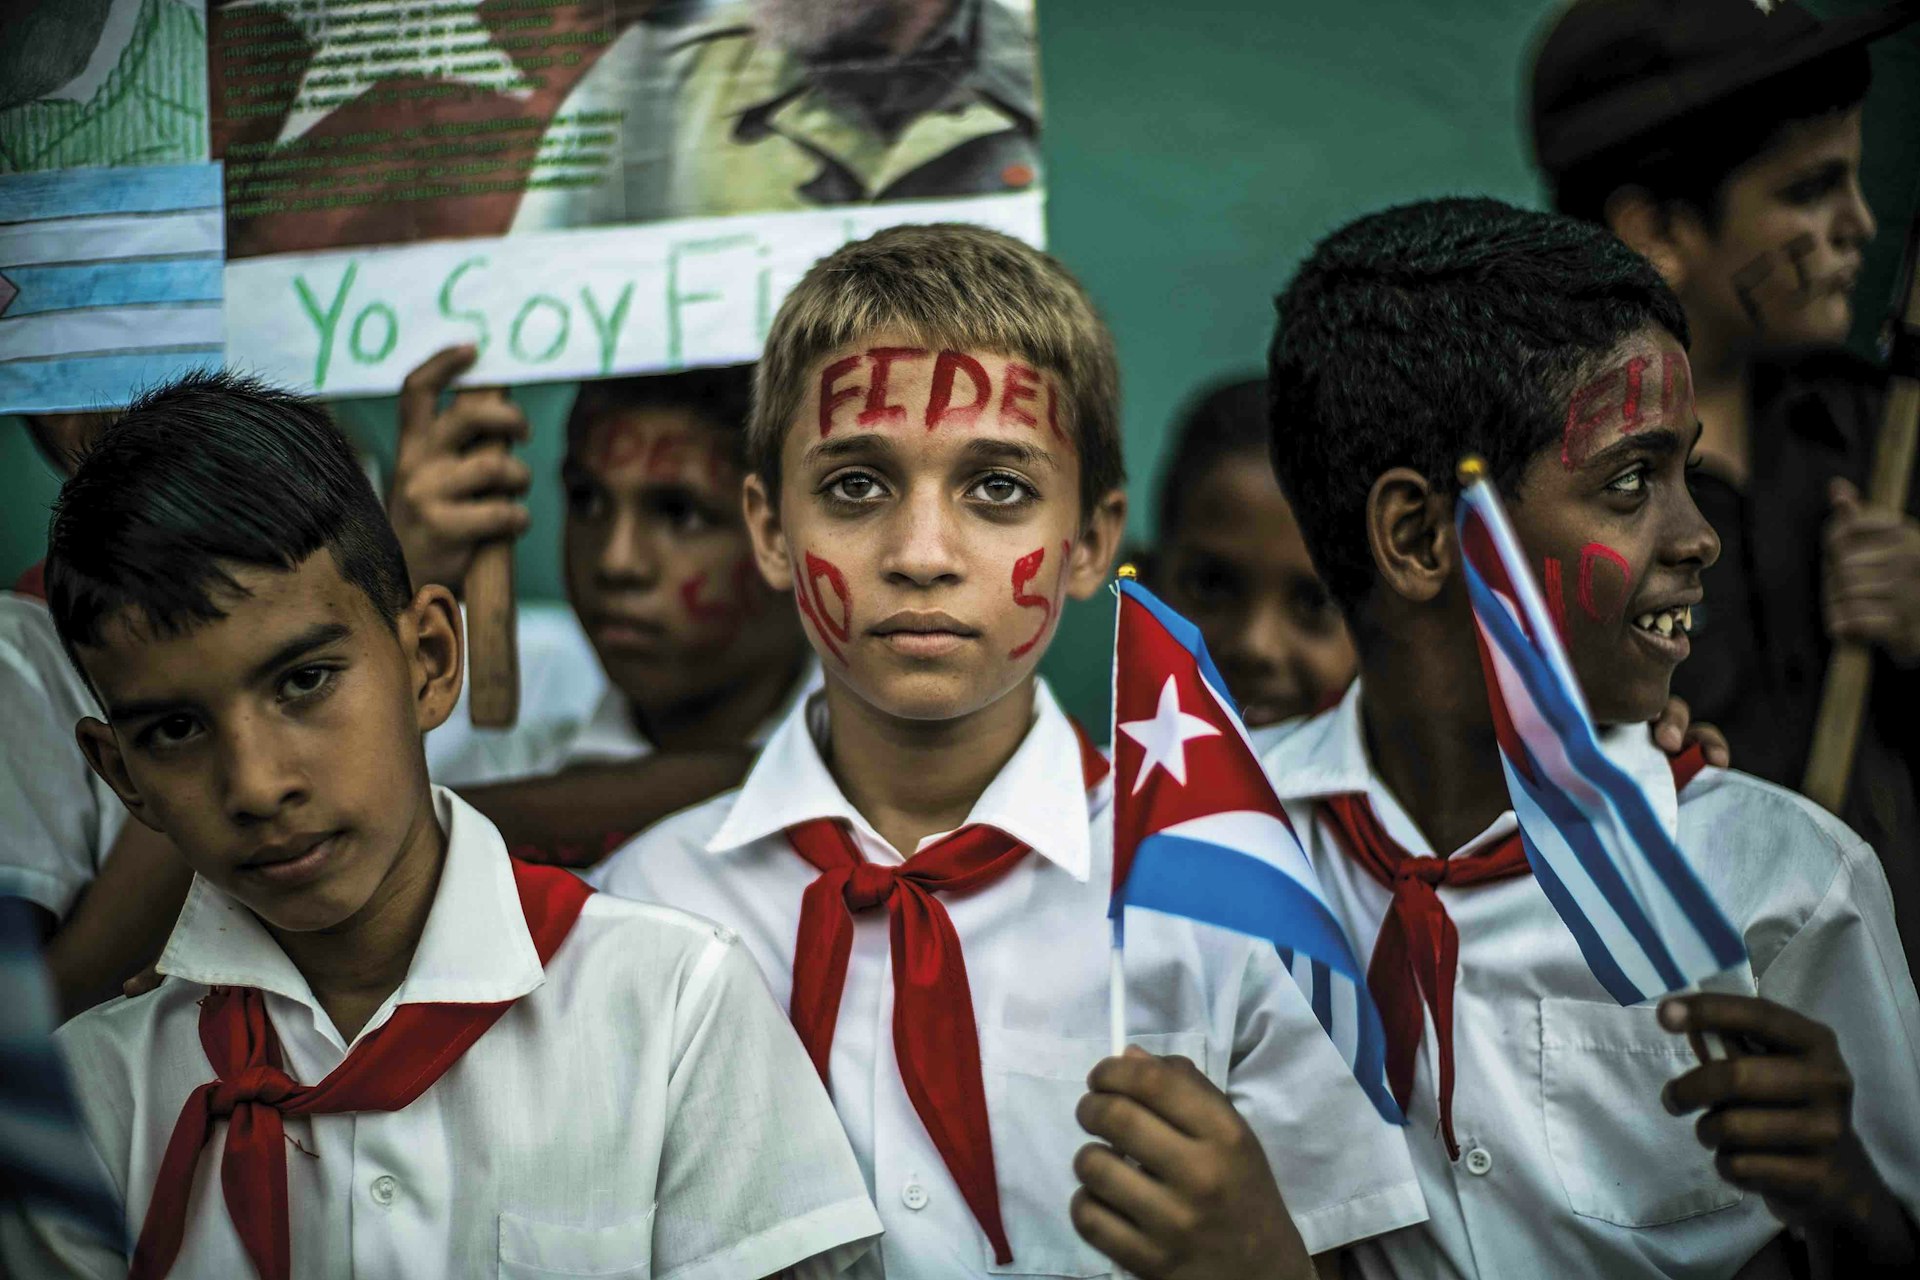 Photos of Cuba during the aftermath of Castro’s death